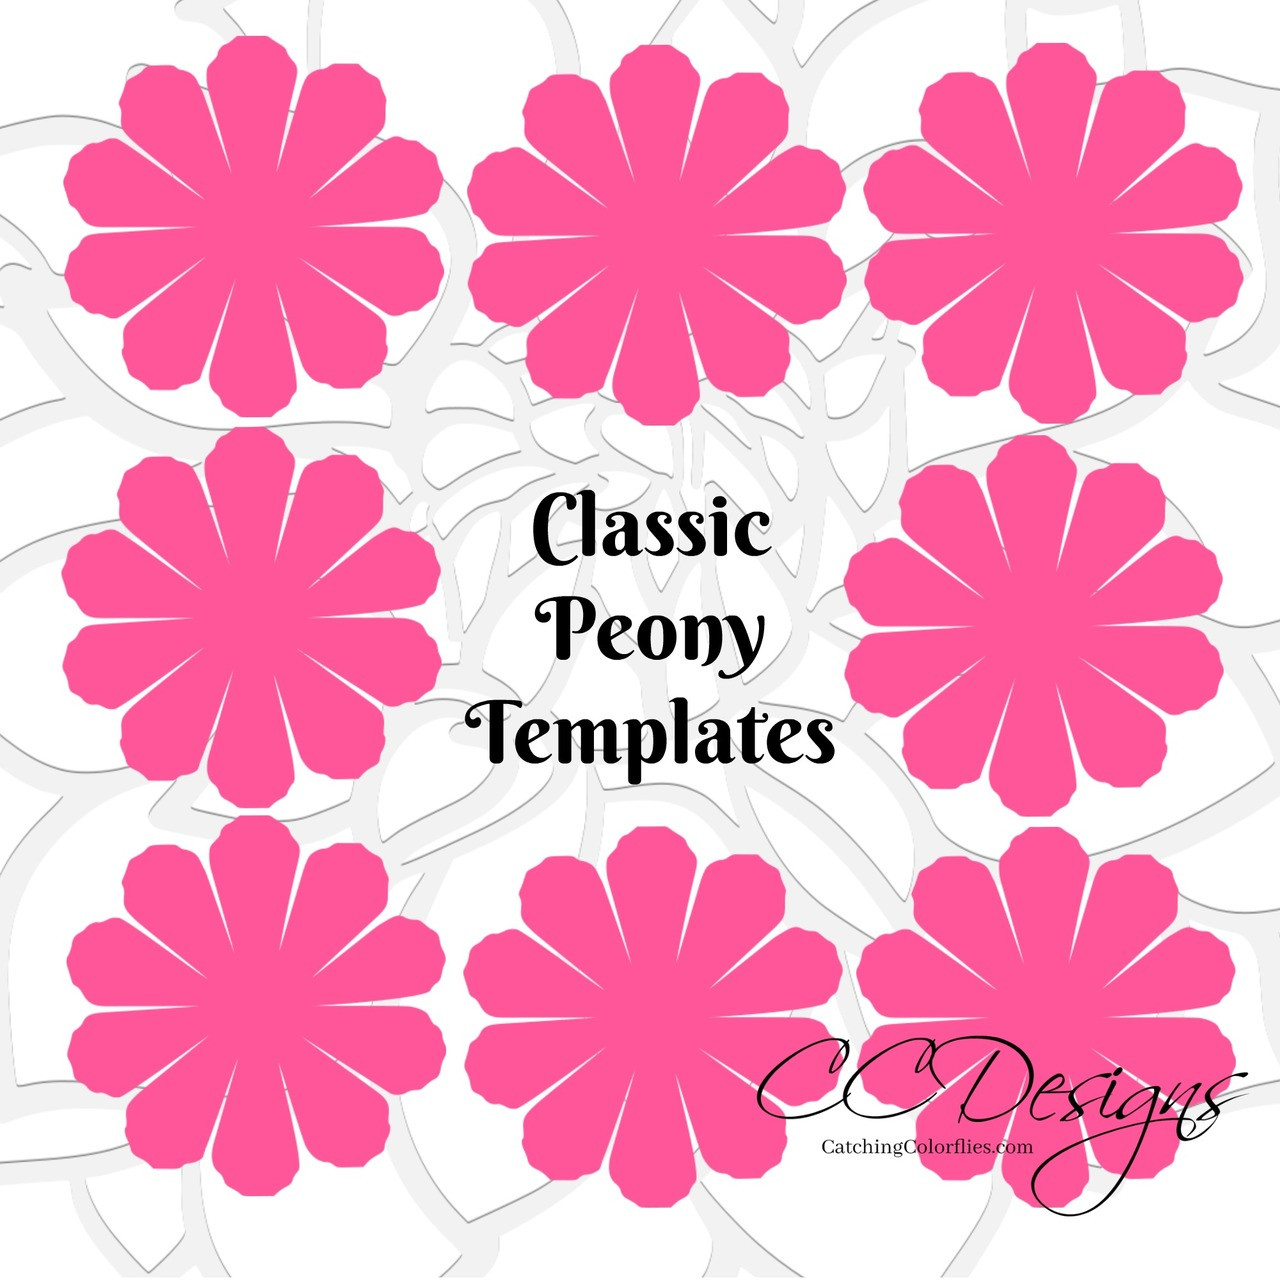 Download Peony Paper Flower Template - Catching Colorflies